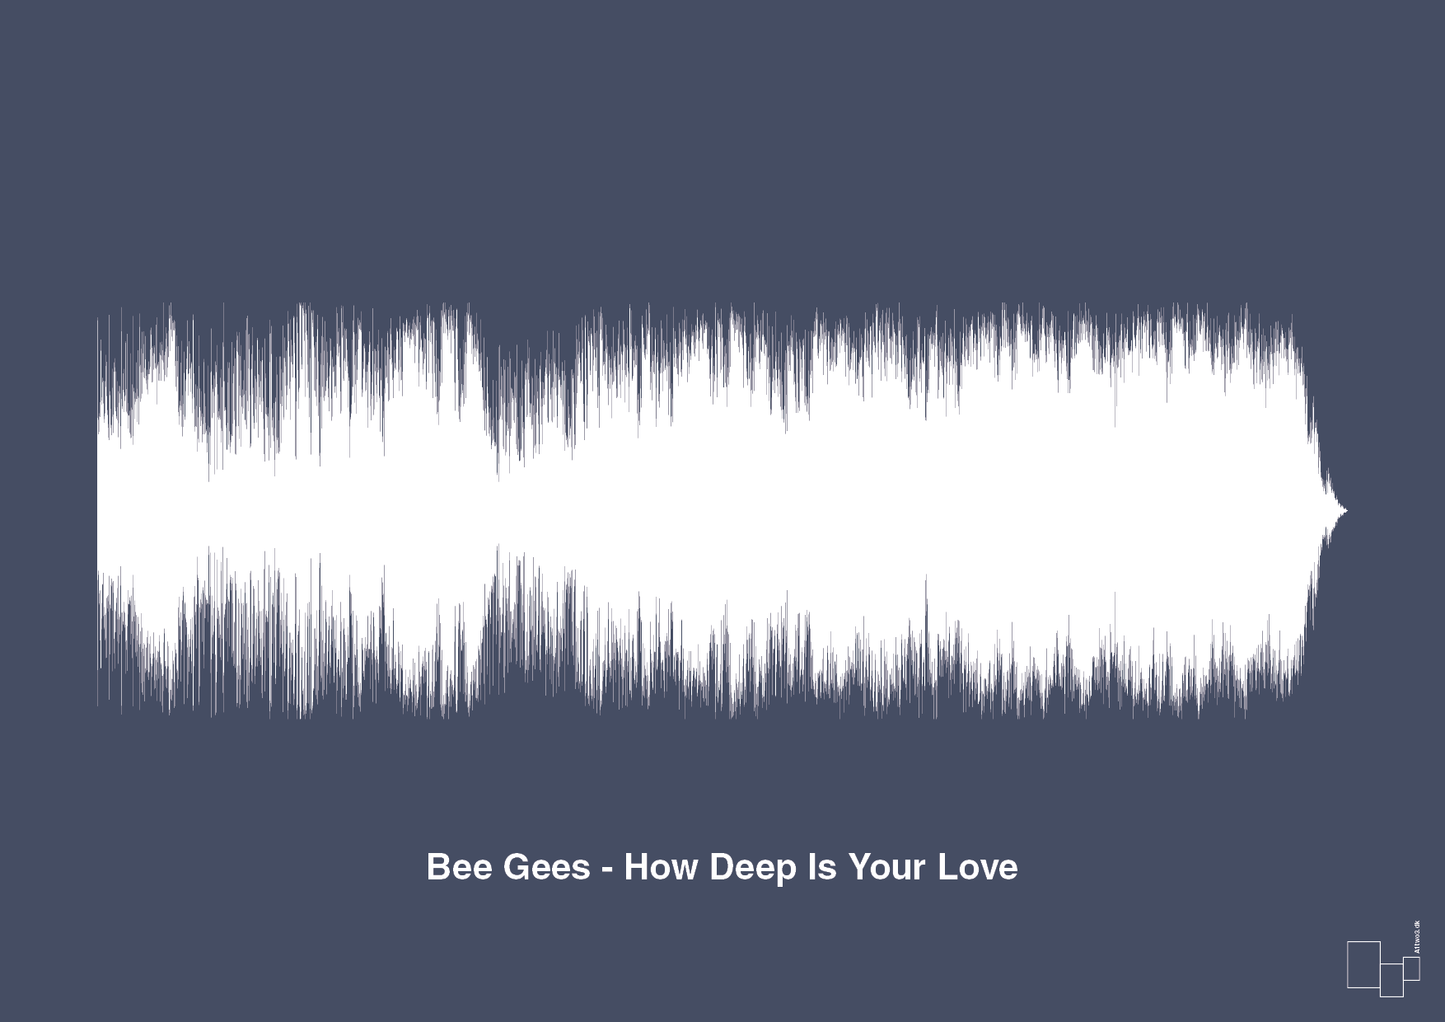 bee gees - how deep is your love - Plakat med Musik i Petrol